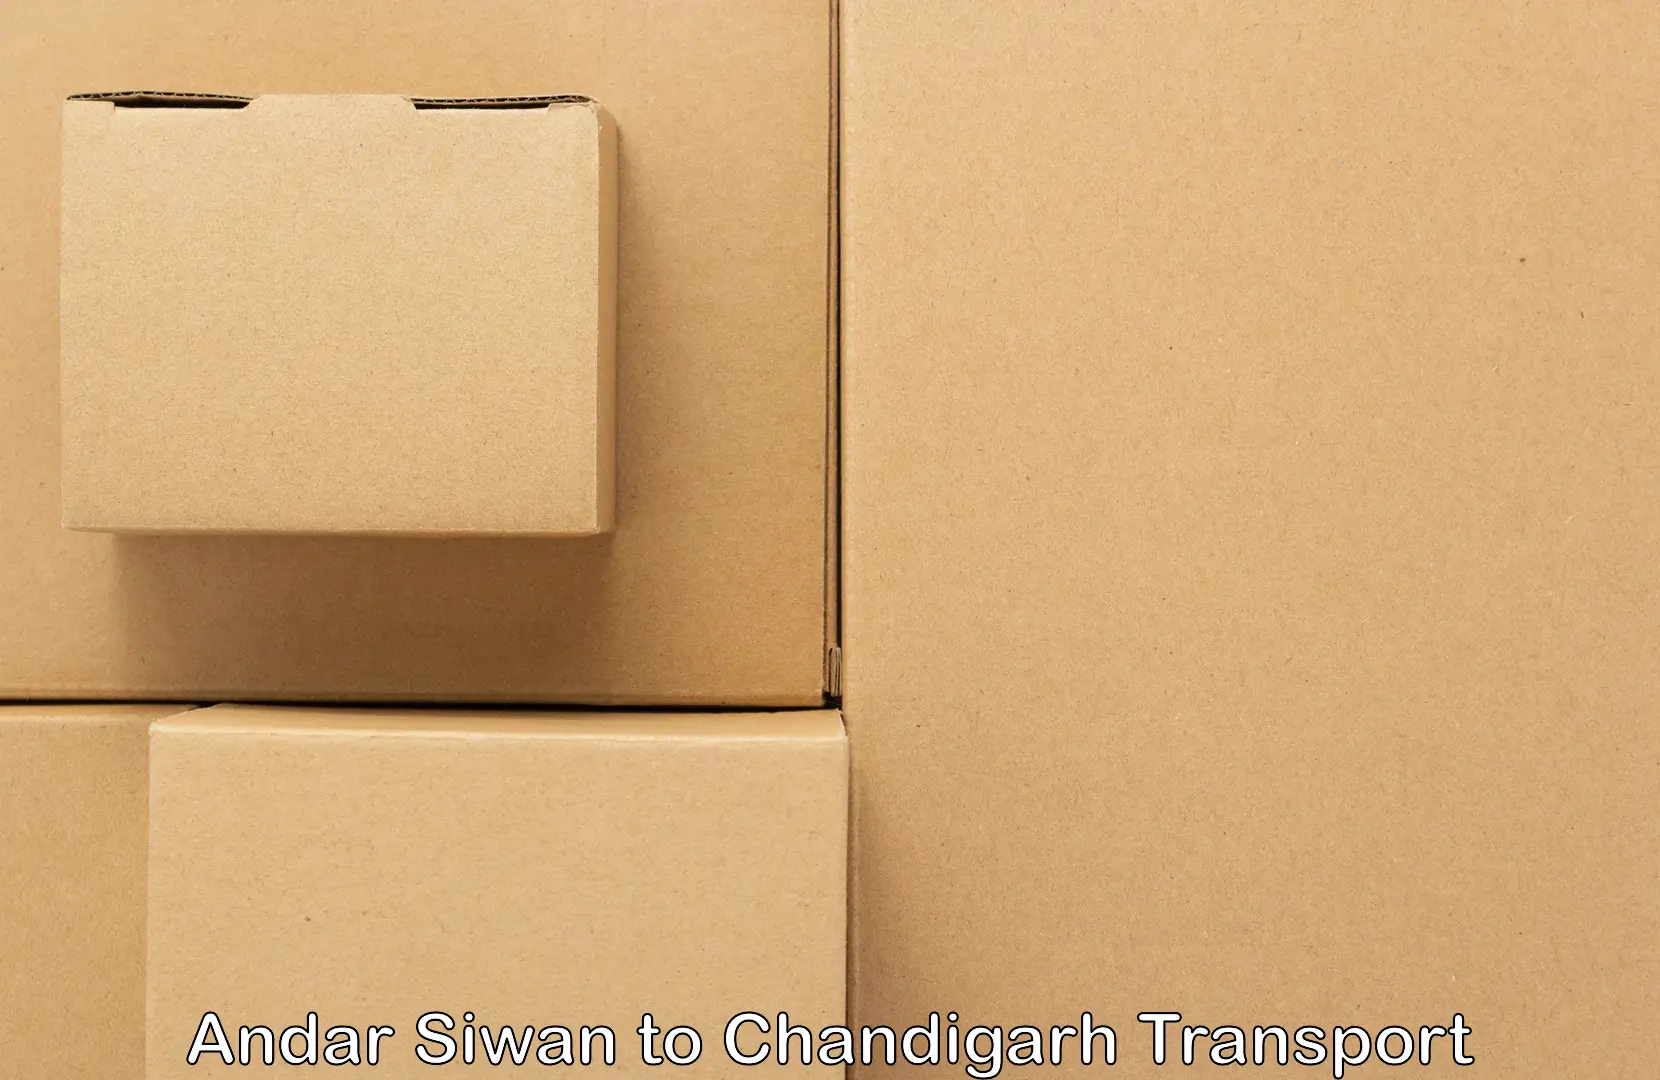 Container transport service Andar Siwan to Chandigarh